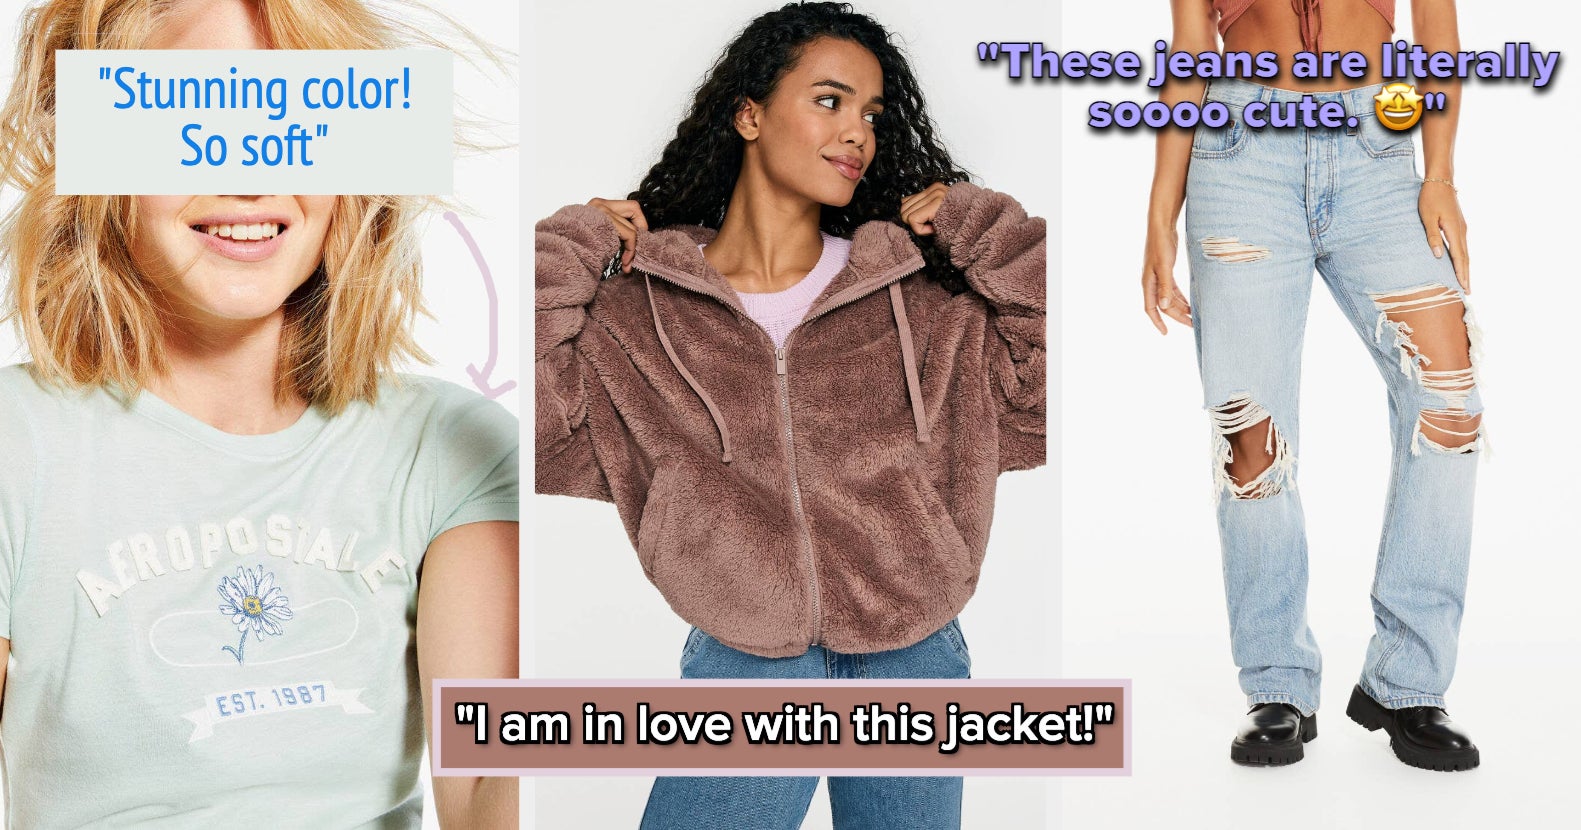 20 Things From Aéropostale You'll Want To Buy For The Reviews Alone